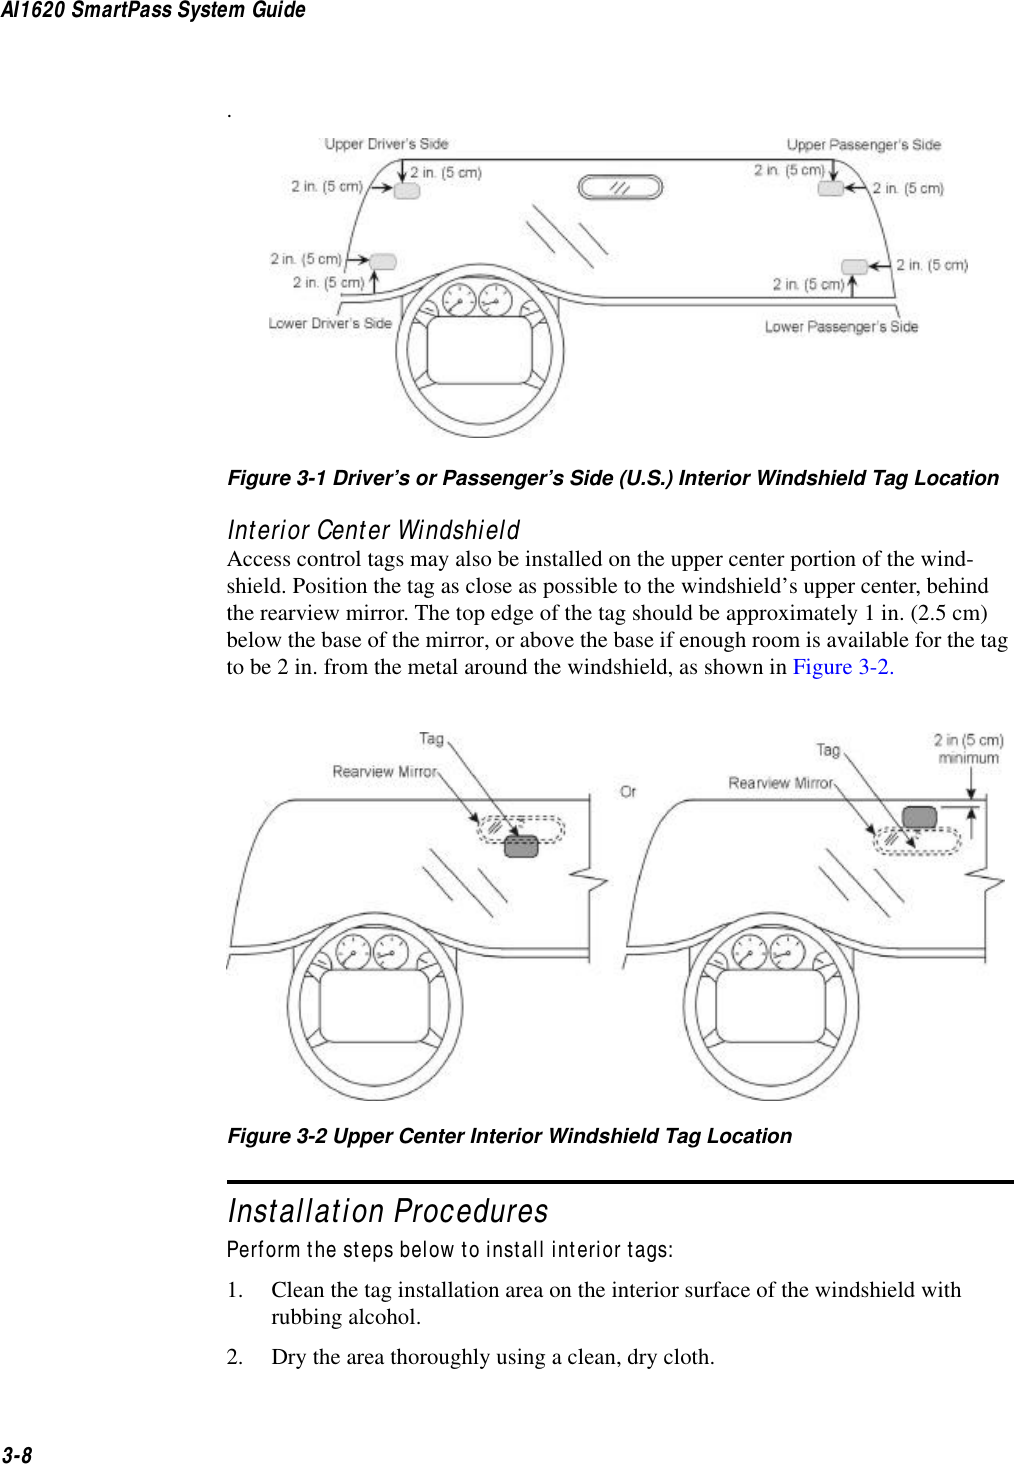 AI1620 SmartPass System Guide3-8.Figure 3-1 Driver’s or Passenger’s Side (U.S.) Interior Windshield Tag LocationInterior Center WindshieldAccess control tags may also be installed on the upper center portion of the wind-shield. Position the tag as close as possible to the windshield’s upper center, behind the rearview mirror. The top edge of the tag should be approximately 1 in. (2.5 cm) below the base of the mirror, or above the base if enough room is available for the tag to be 2 in. from the metal around the windshield, as shown in Figure 3-2.Figure 3-2 Upper Center Interior Windshield Tag LocationInstallation ProceduresPerform the steps below to install interior tags:1. Clean the tag installation area on the interior surface of the windshield with rubbing alcohol.2. Dry the area thoroughly using a clean, dry cloth.